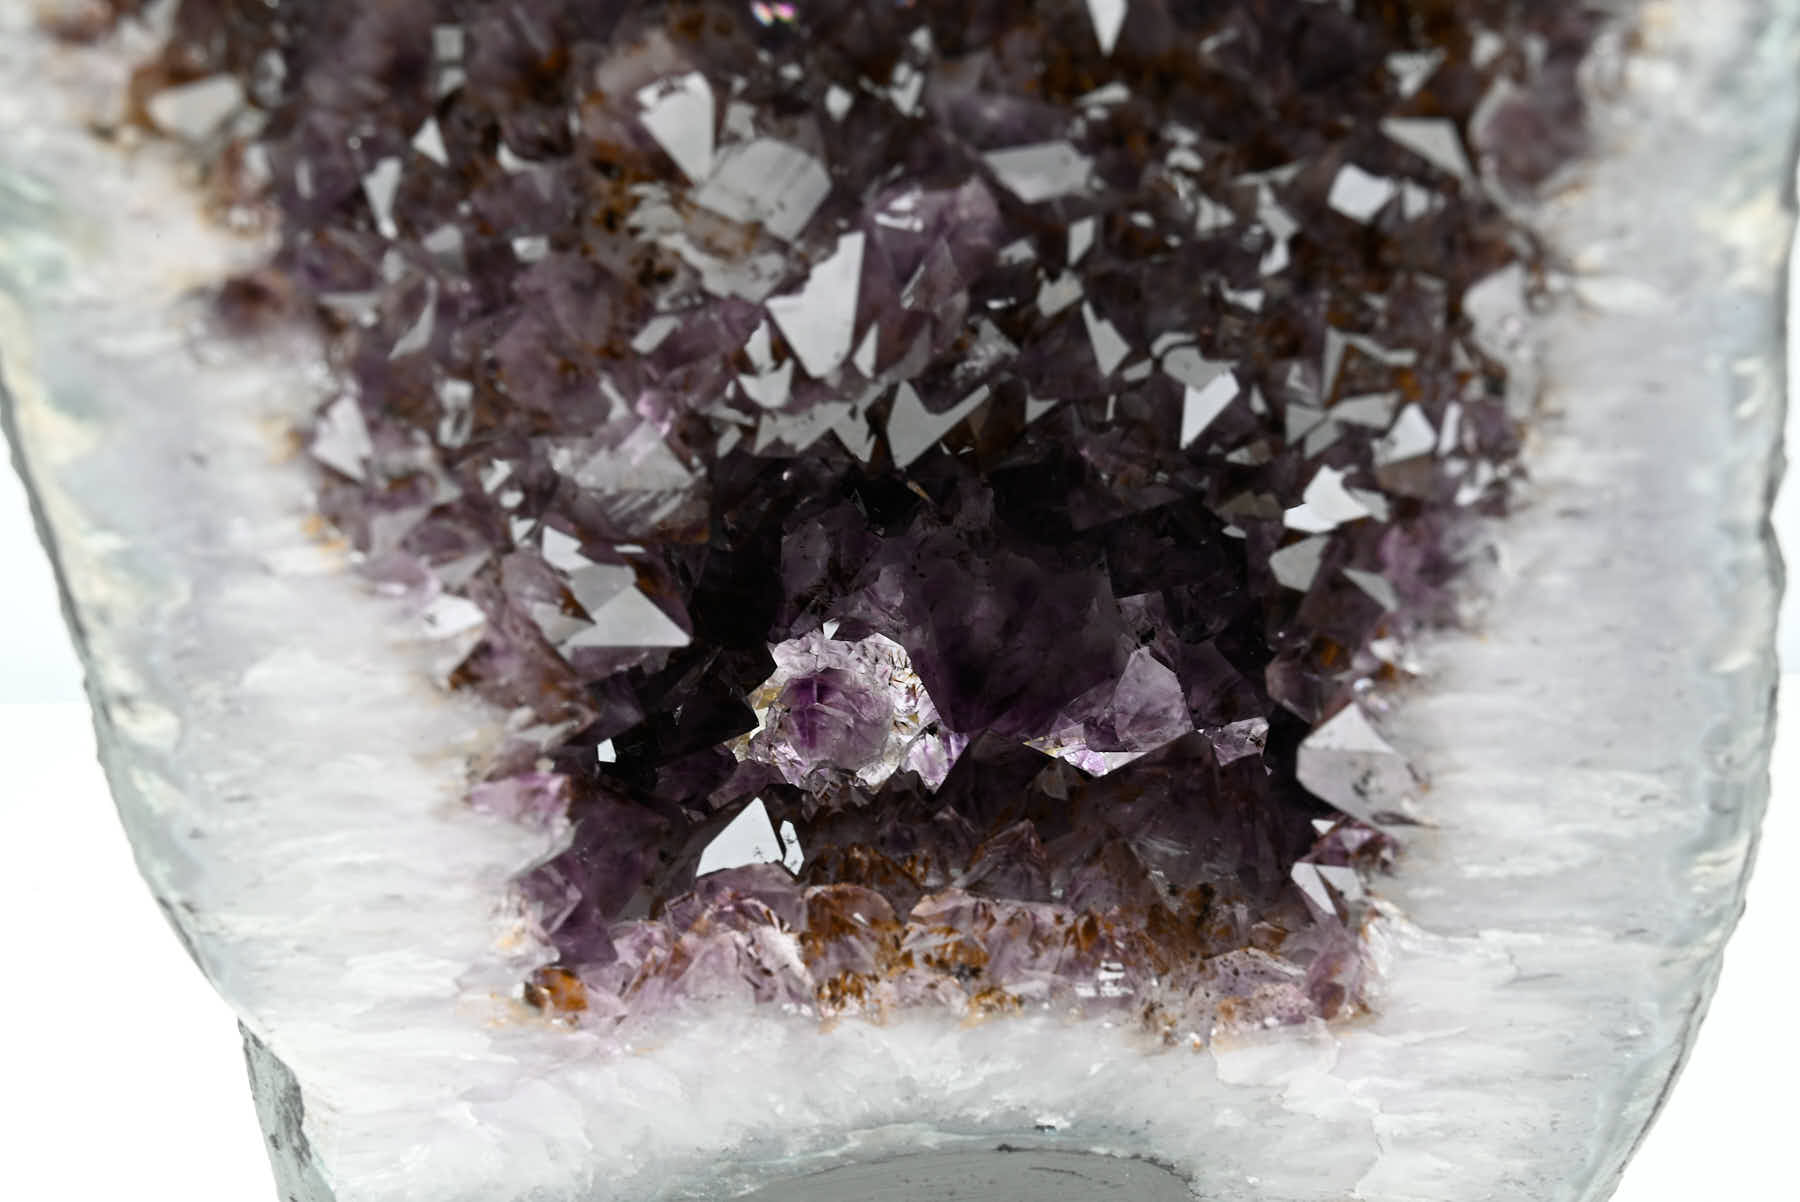 Extra Quality Amethyst Cathedral - 15.6kg, 50cm tall - #CAAMET-10048